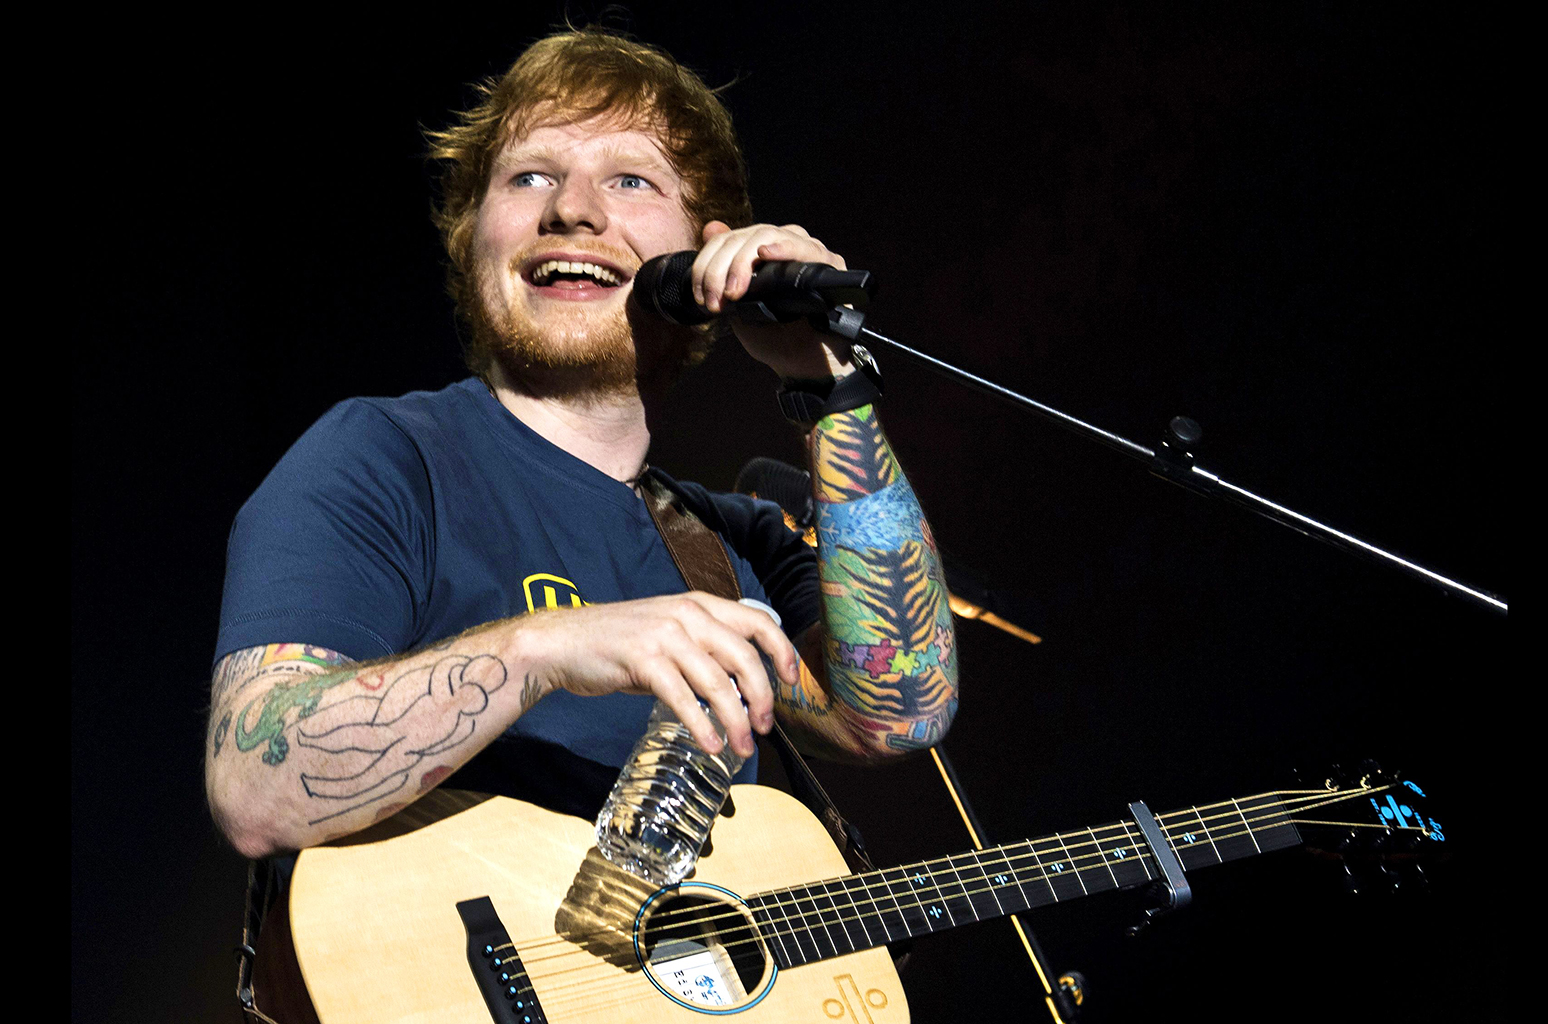 We Really Hope Ed Sheeran Recovers In Time For His KL Concert!